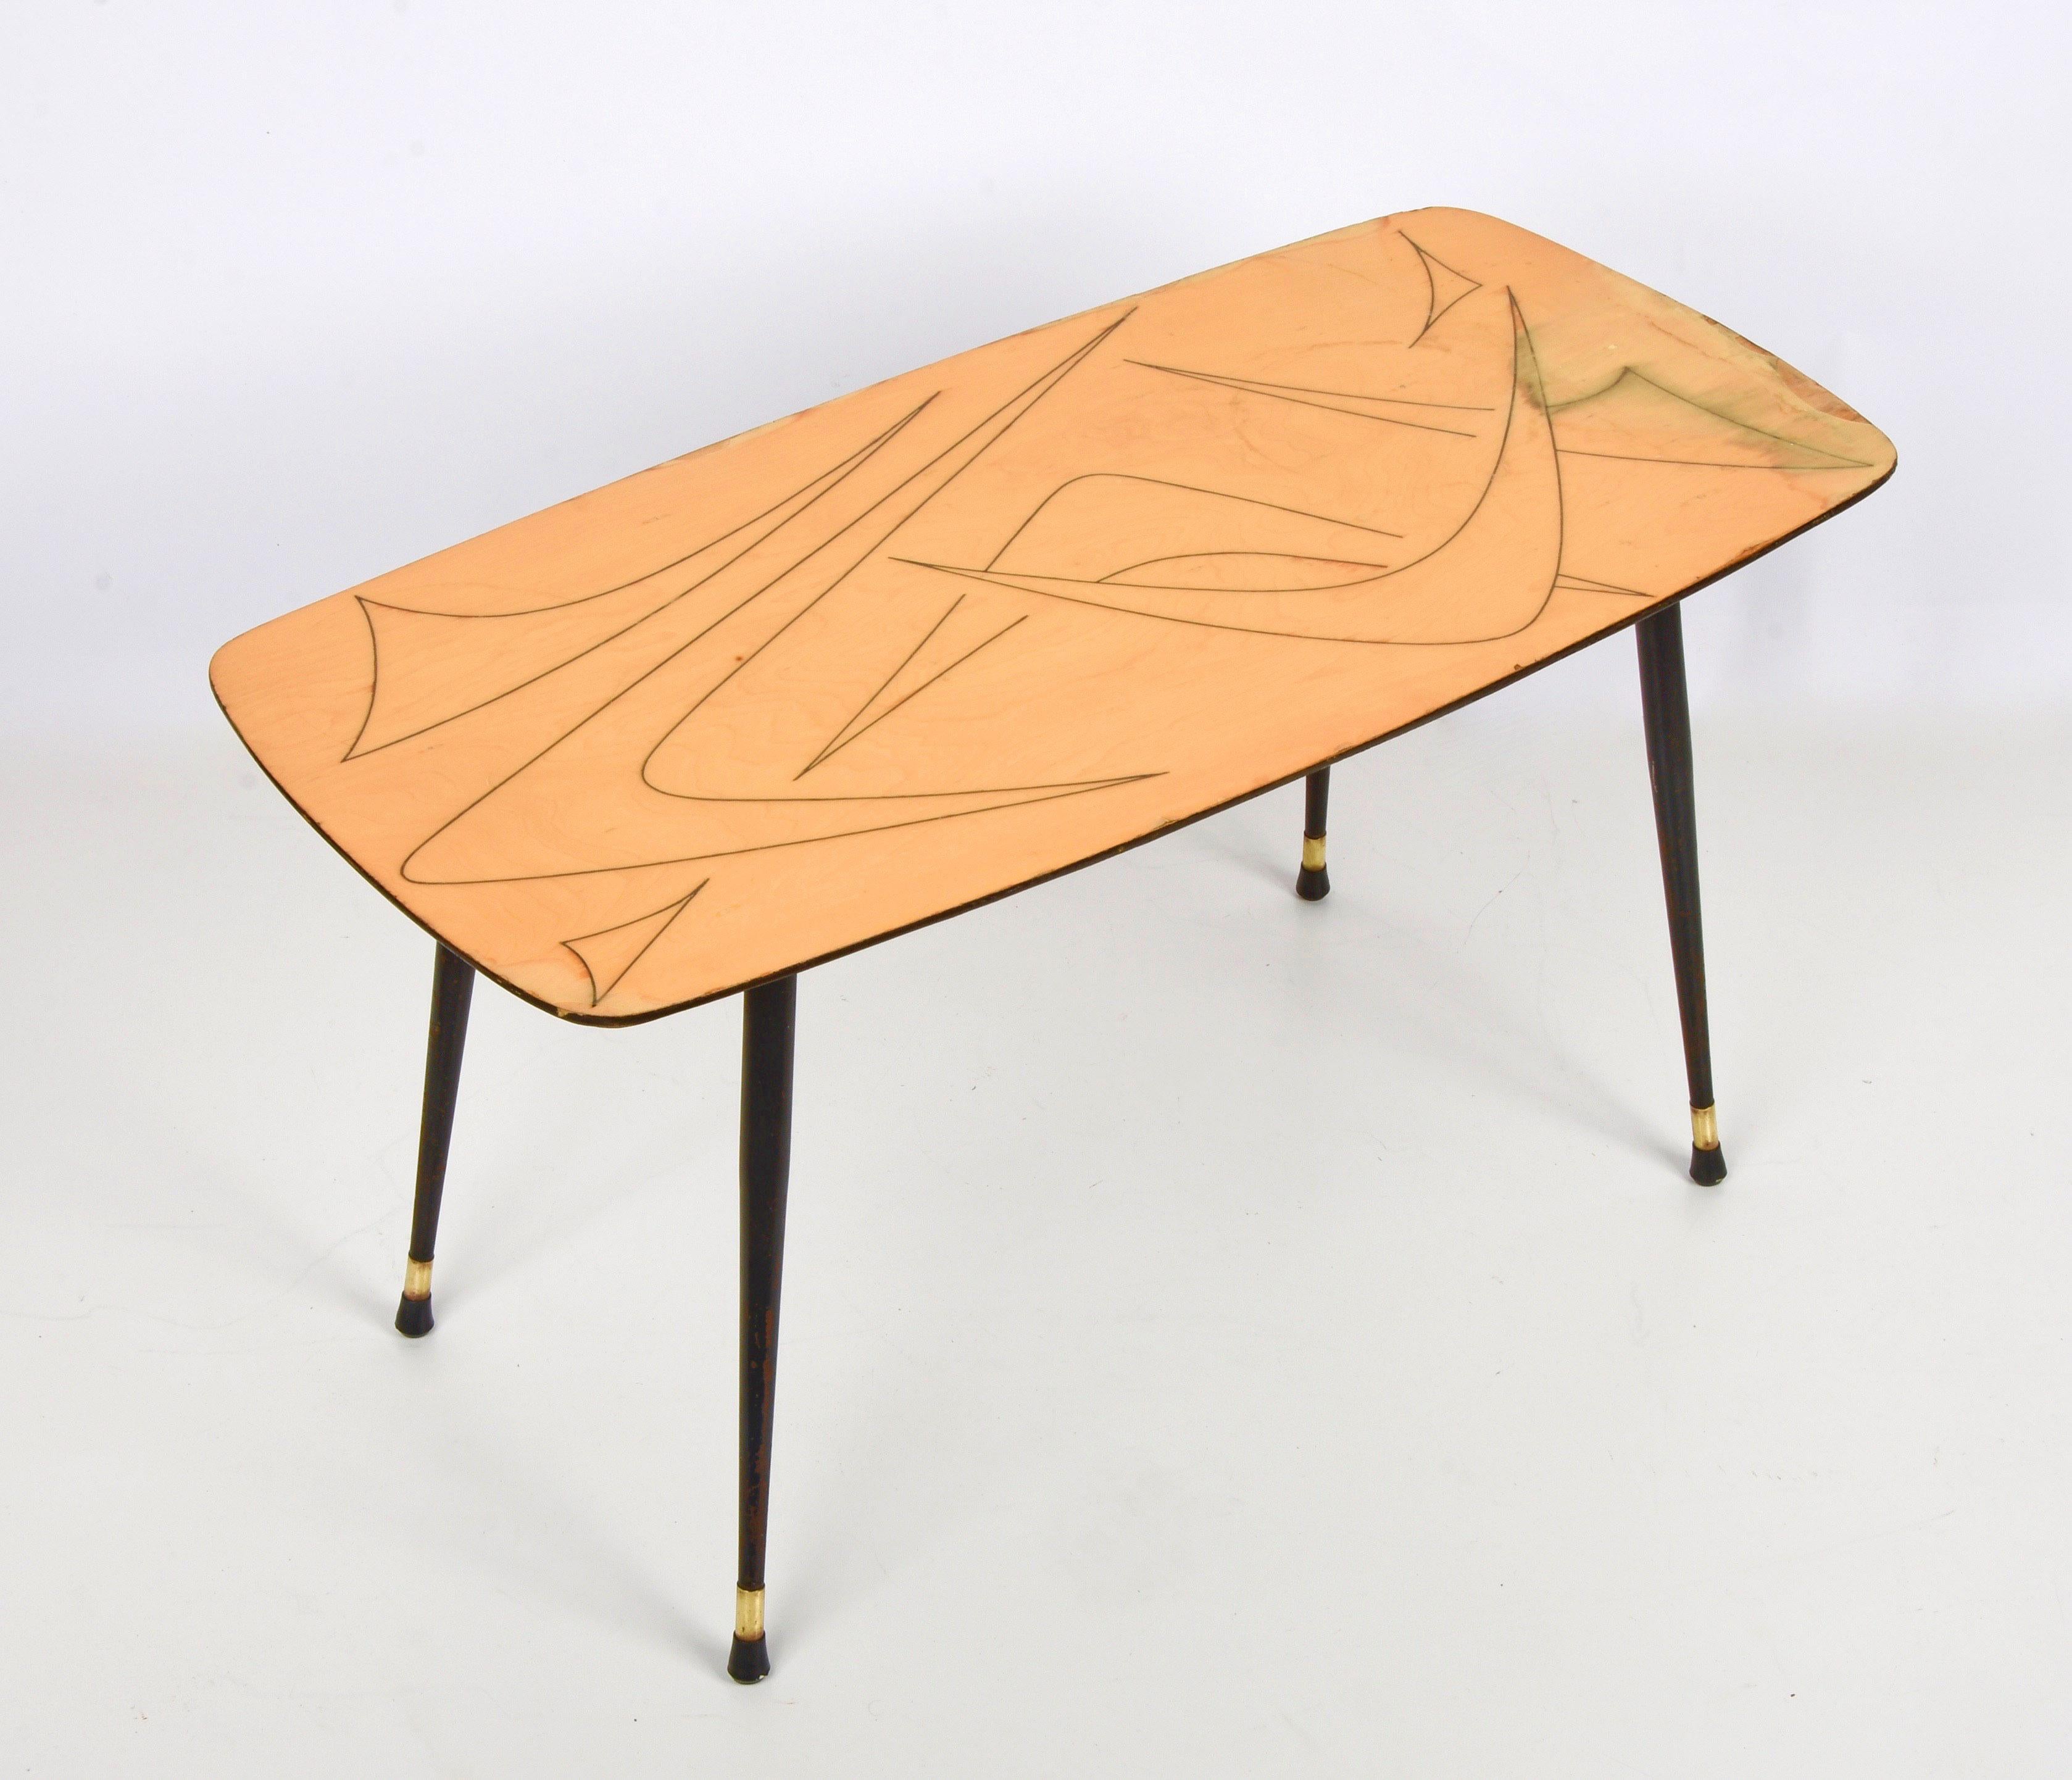 Marvellous midcentury coffee table in drawn wood, brass and black enamelled metal. This table was produced in Italy during the 1950s.

It is a rare and elegant coffee table in lacquered and yellow-painted wood, it has black metal legs with brass